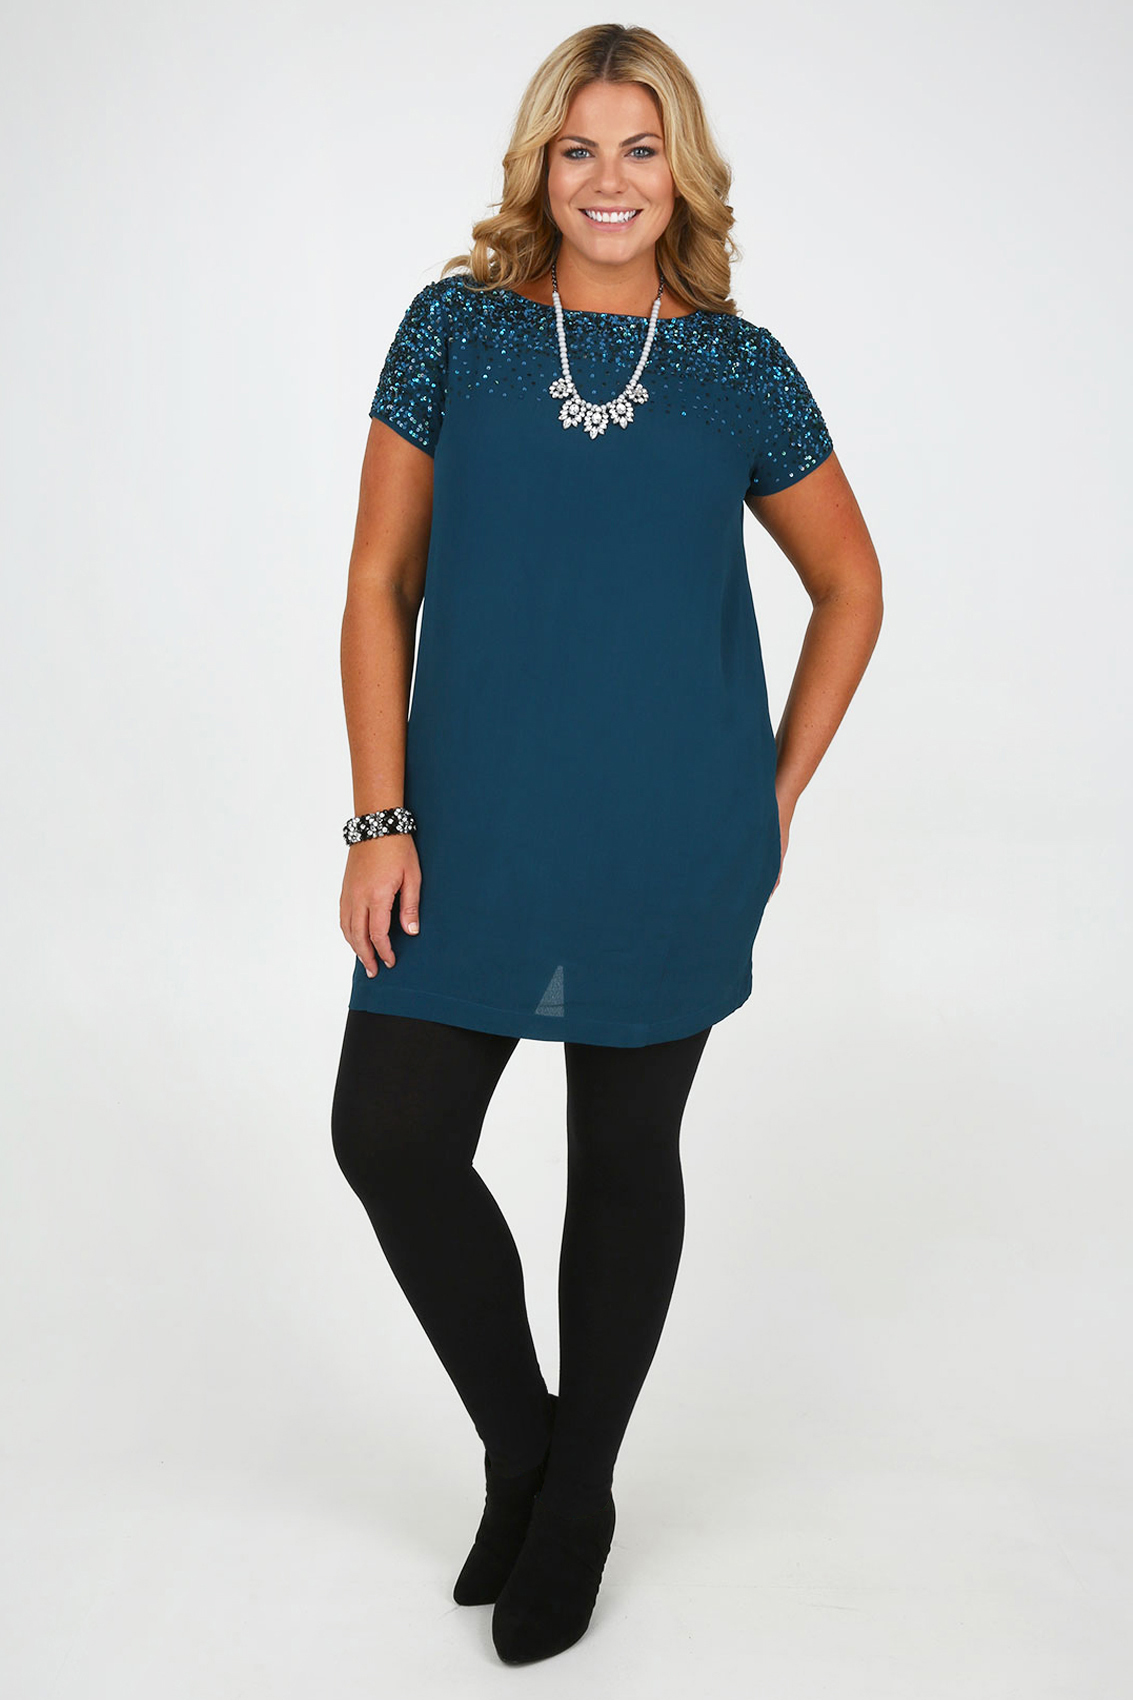 Teal Crepe Tunic Dress With Sequin Embellishment plus Size 16 to 32 1